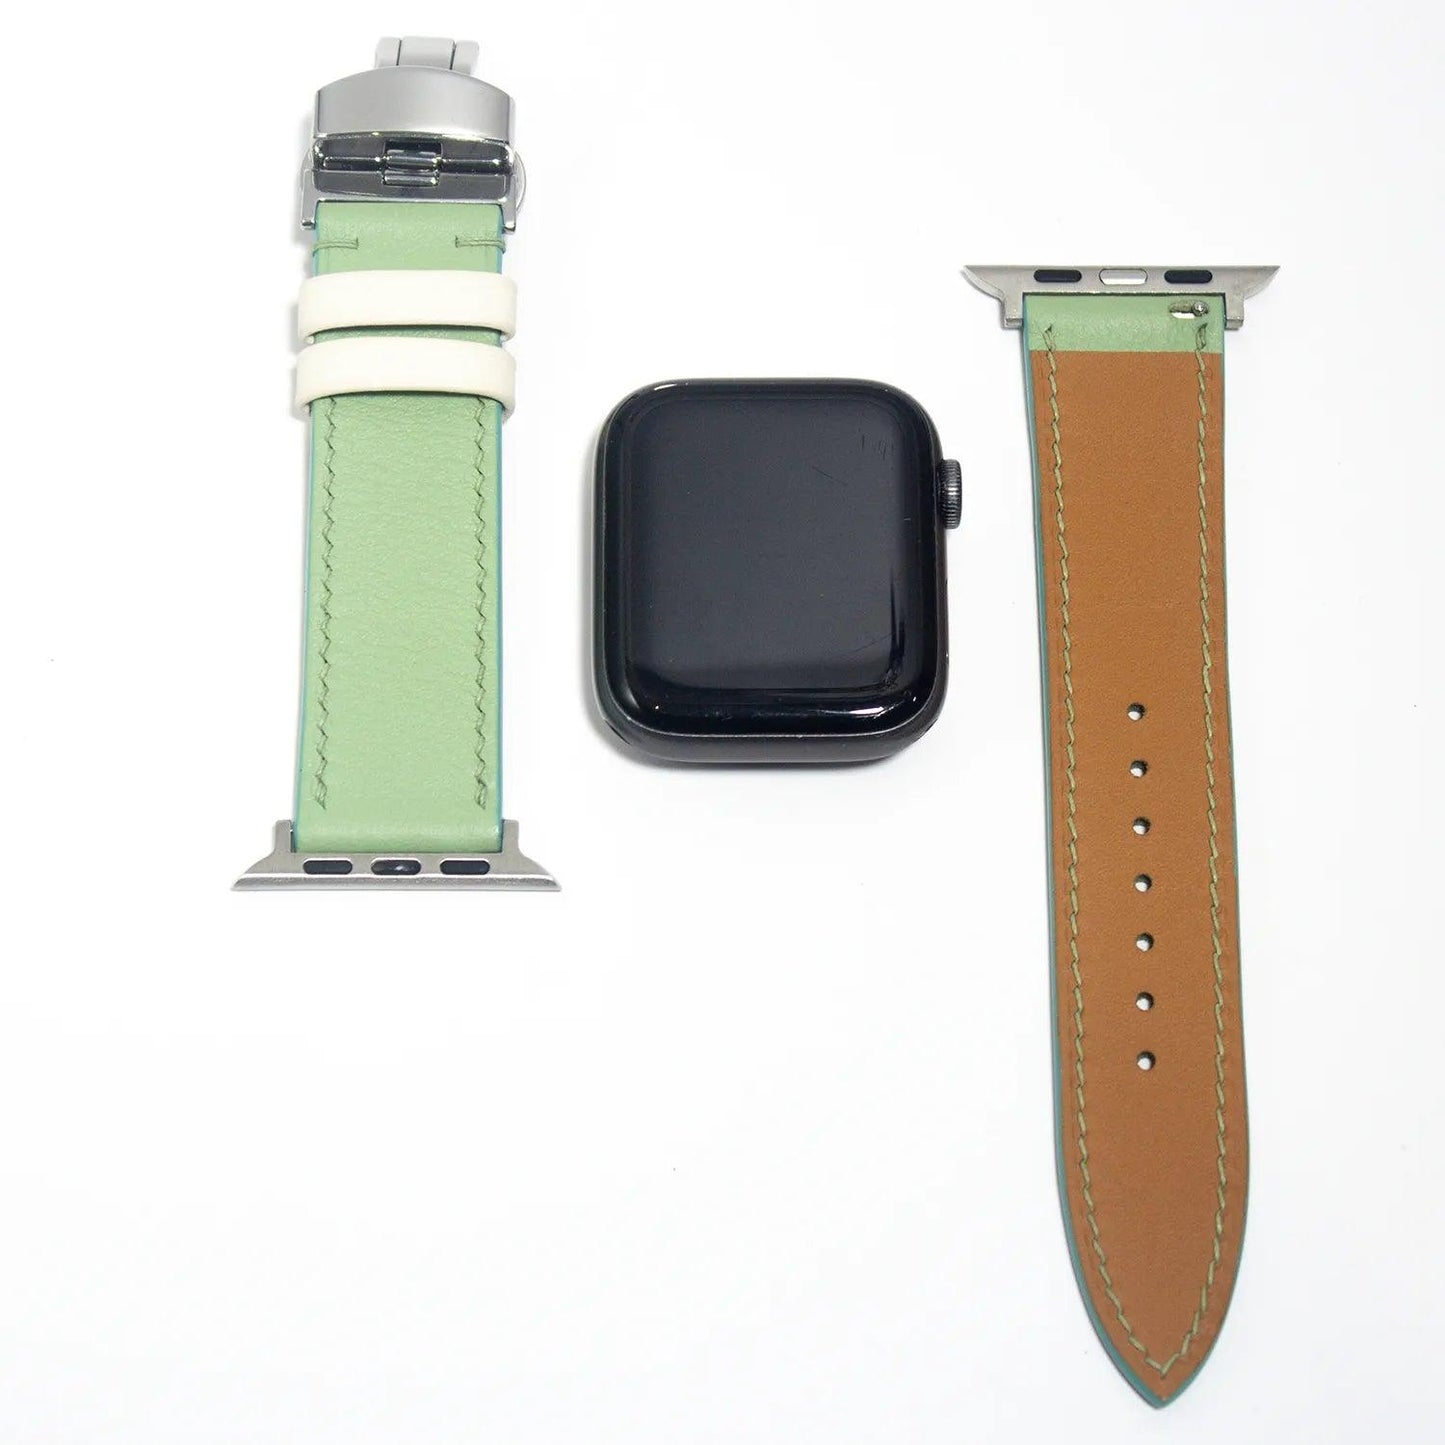 Durable leather watch straps in a striking mint green Swift leather, combining functionality with flair.